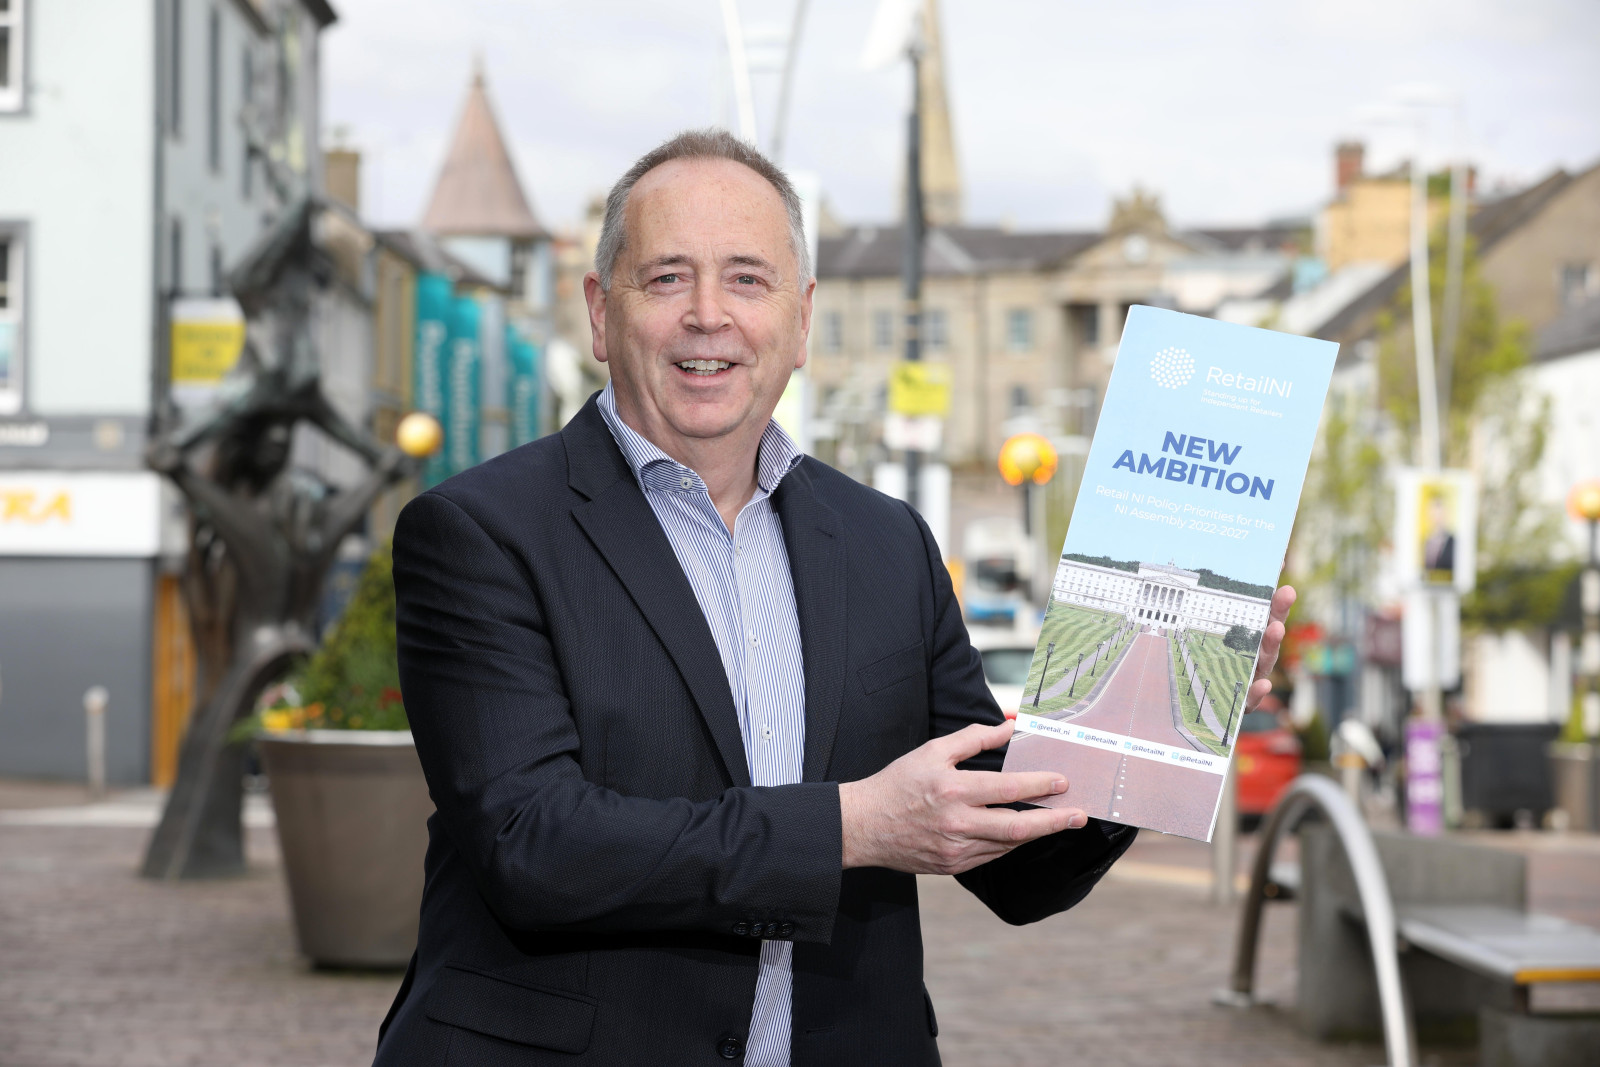 Retail NI Launch New Ambition Plan for Next Assembly